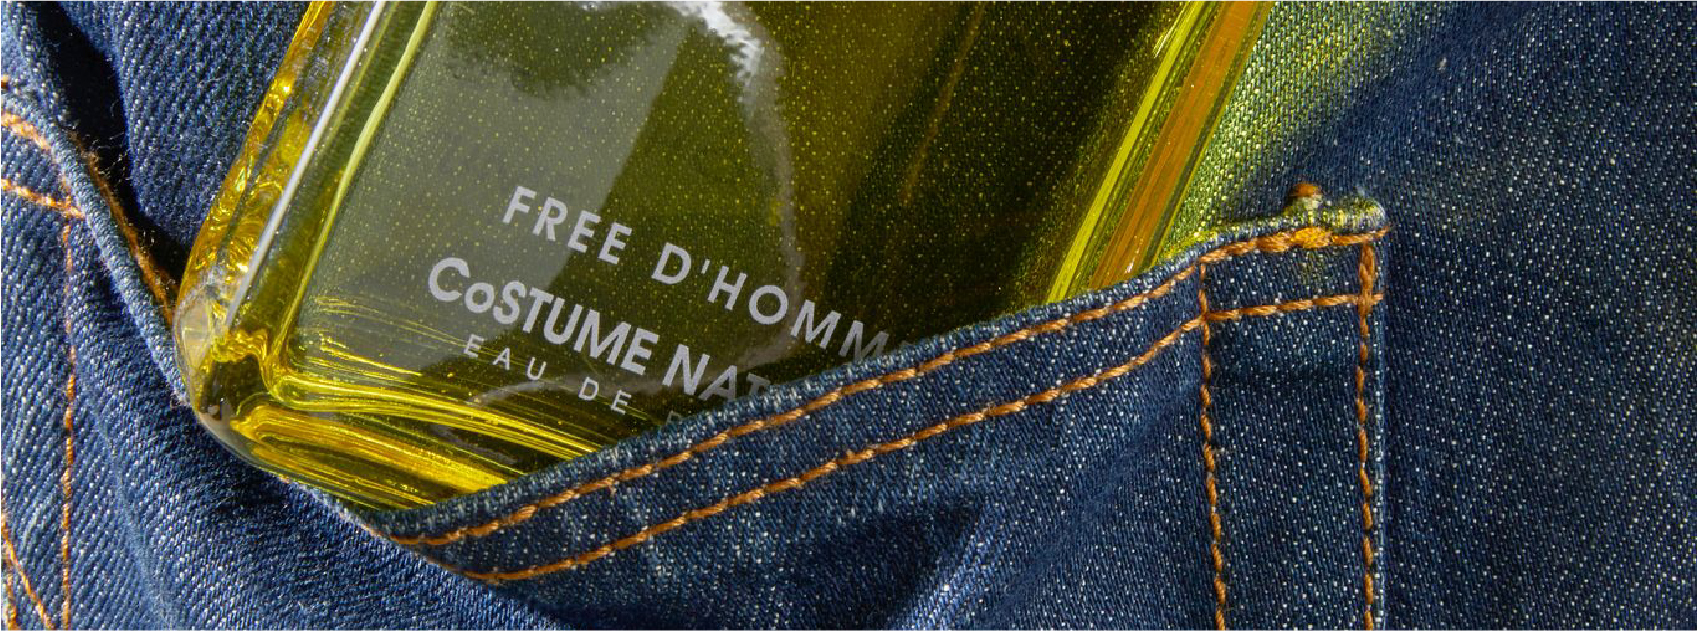 bottle of free d'homme by costume national in a denim pocket